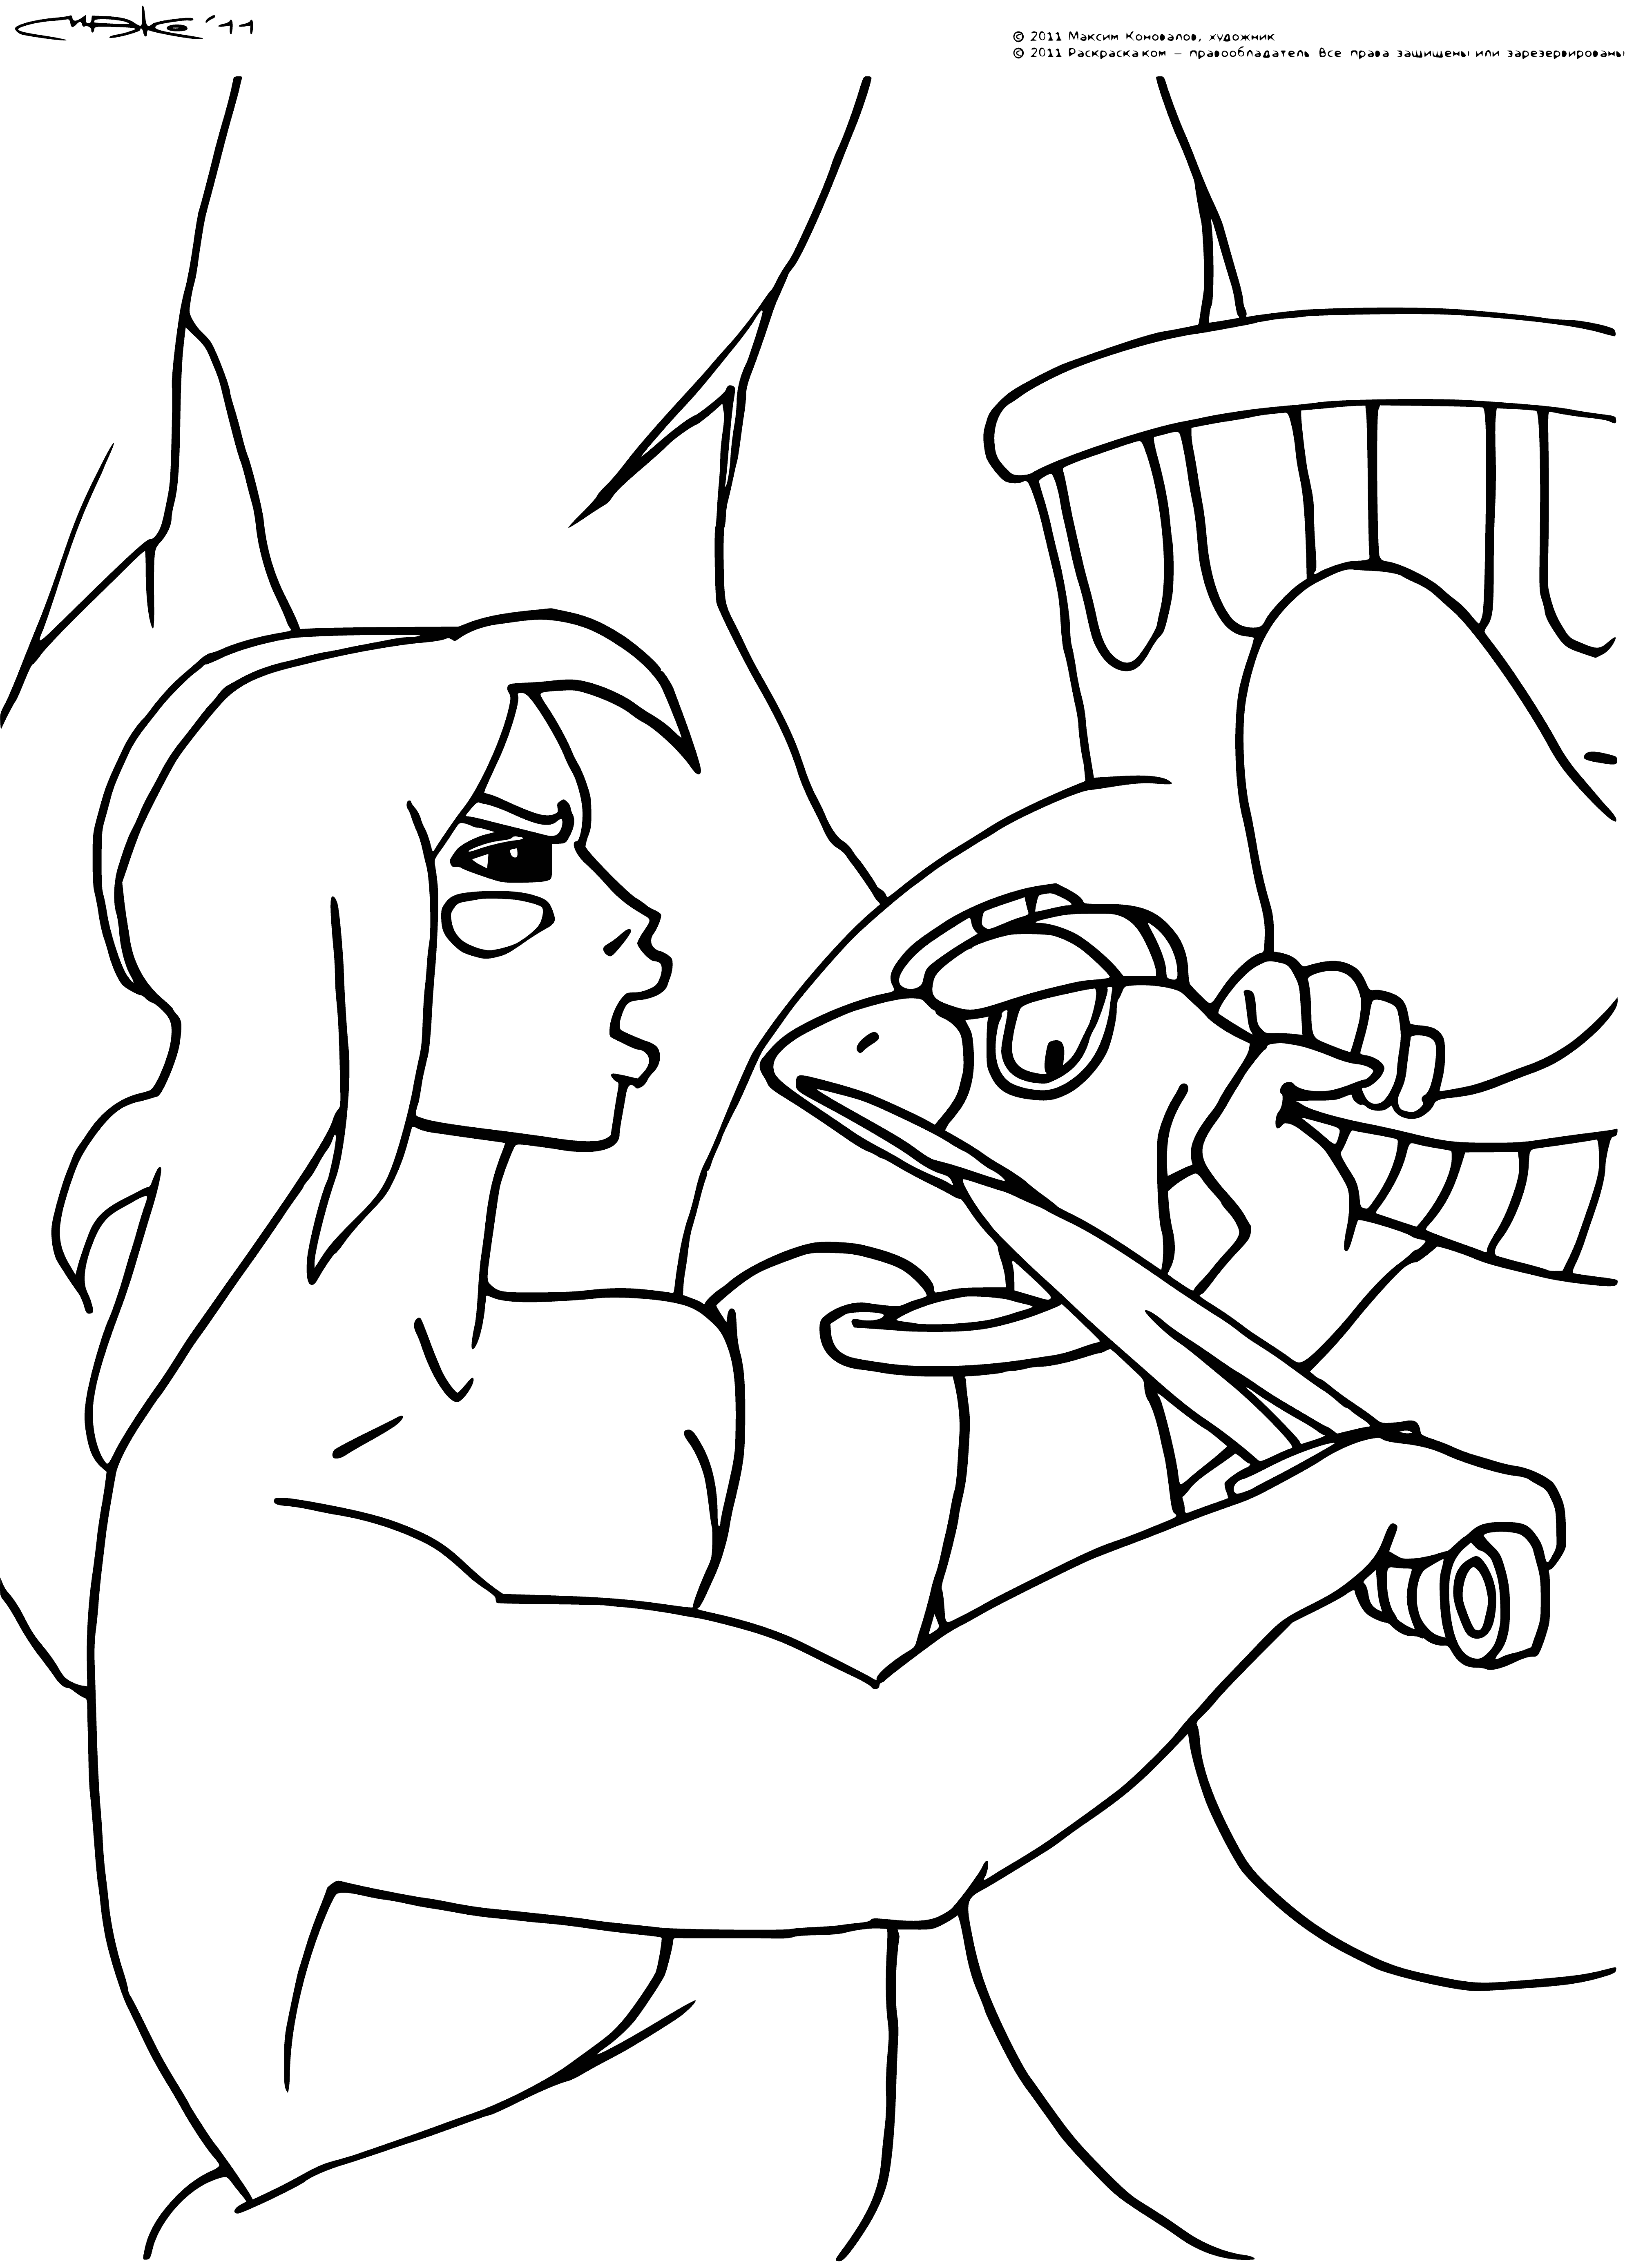 Mowgli, a human raised by wolves in the Jungle Book, is featured in the coloring page with his mouth open, revealing lack of poisonous teeth.